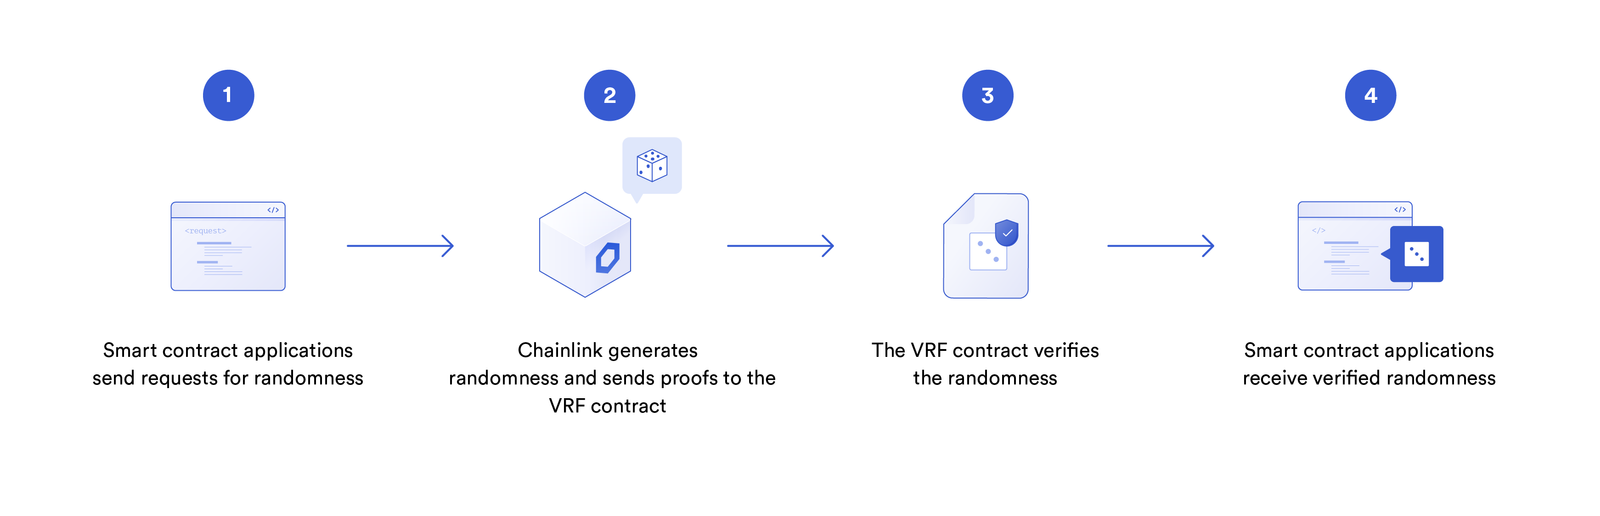 How smart contract applications receive verified randomness from Chainlink.